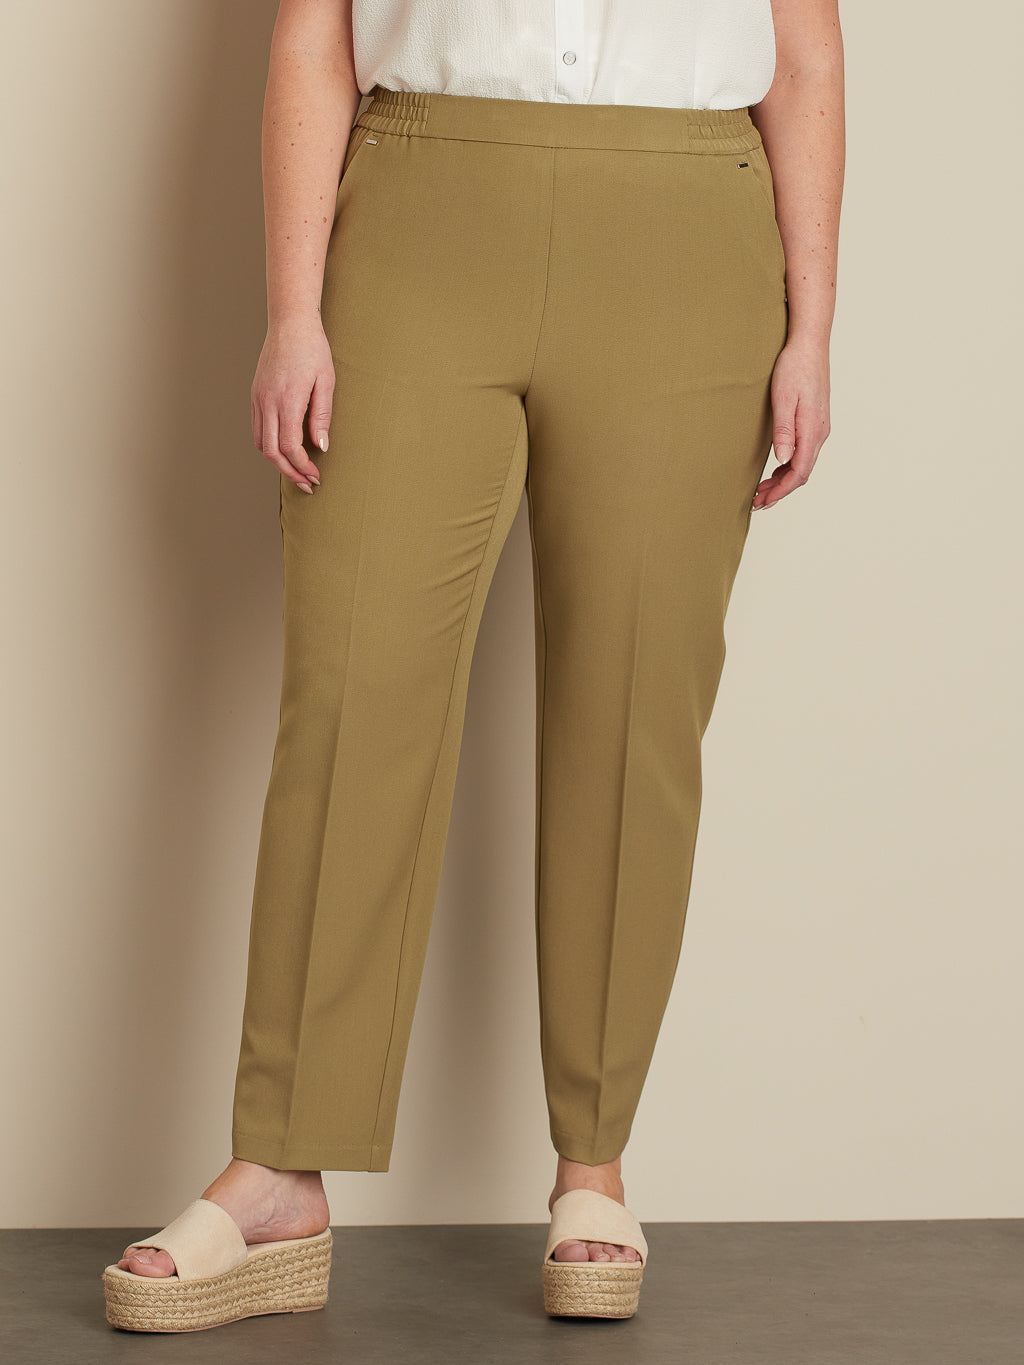 Straight semi-fitted pull-on dress pant  - Petite